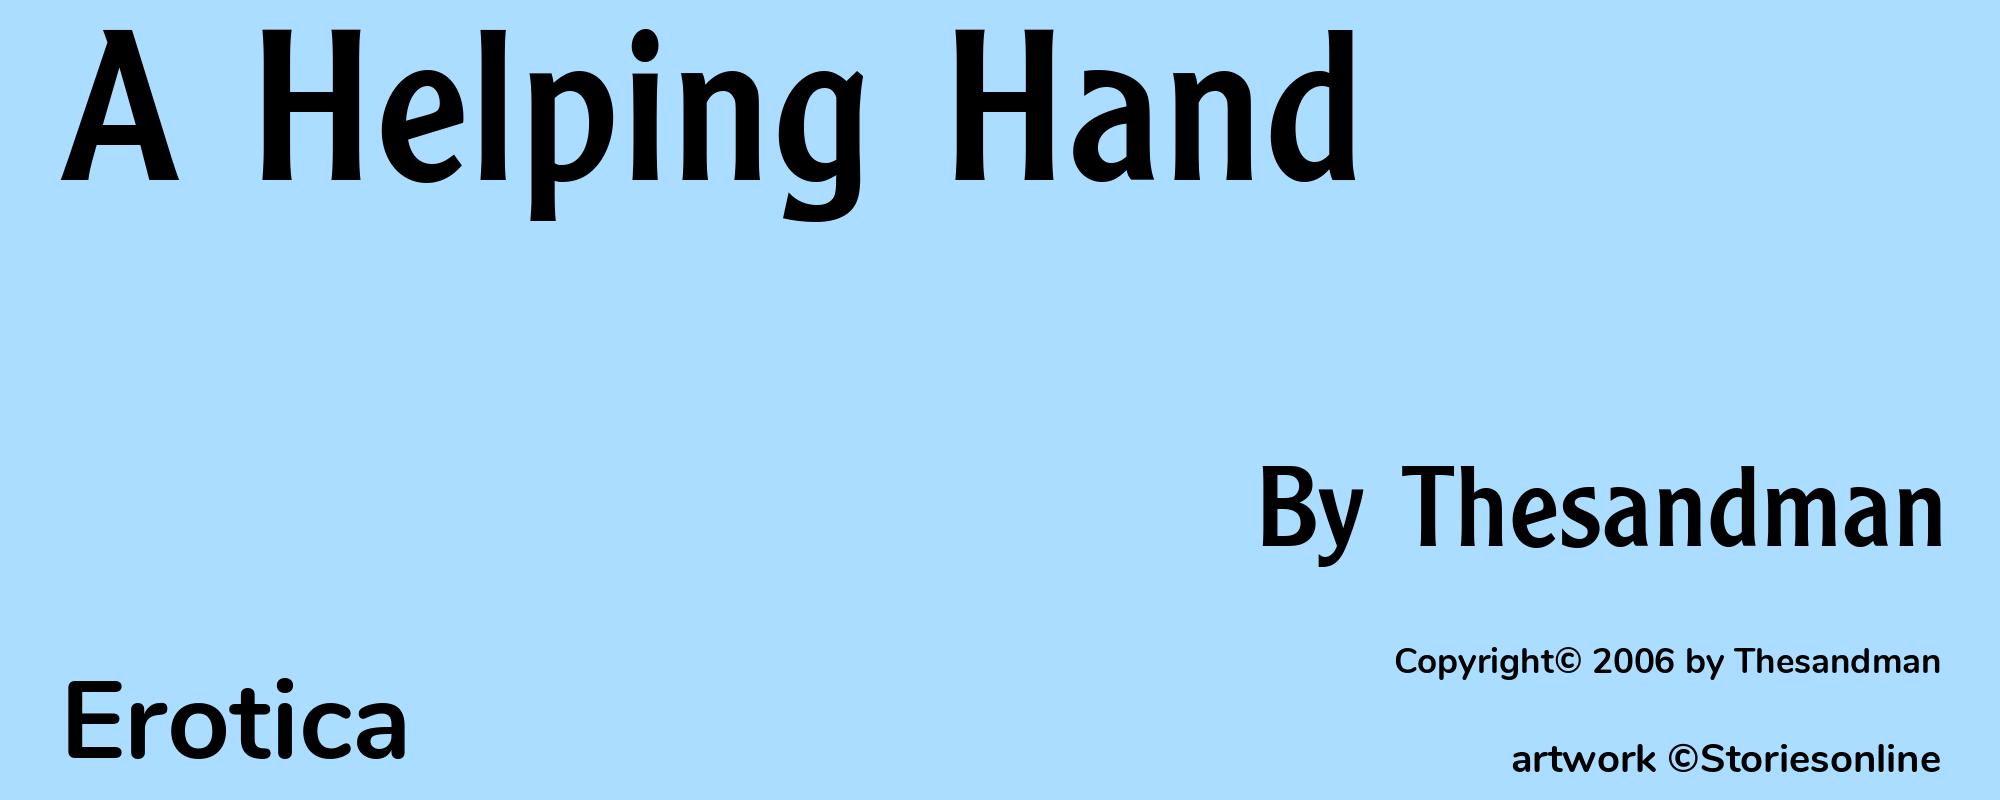 A Helping Hand - Cover